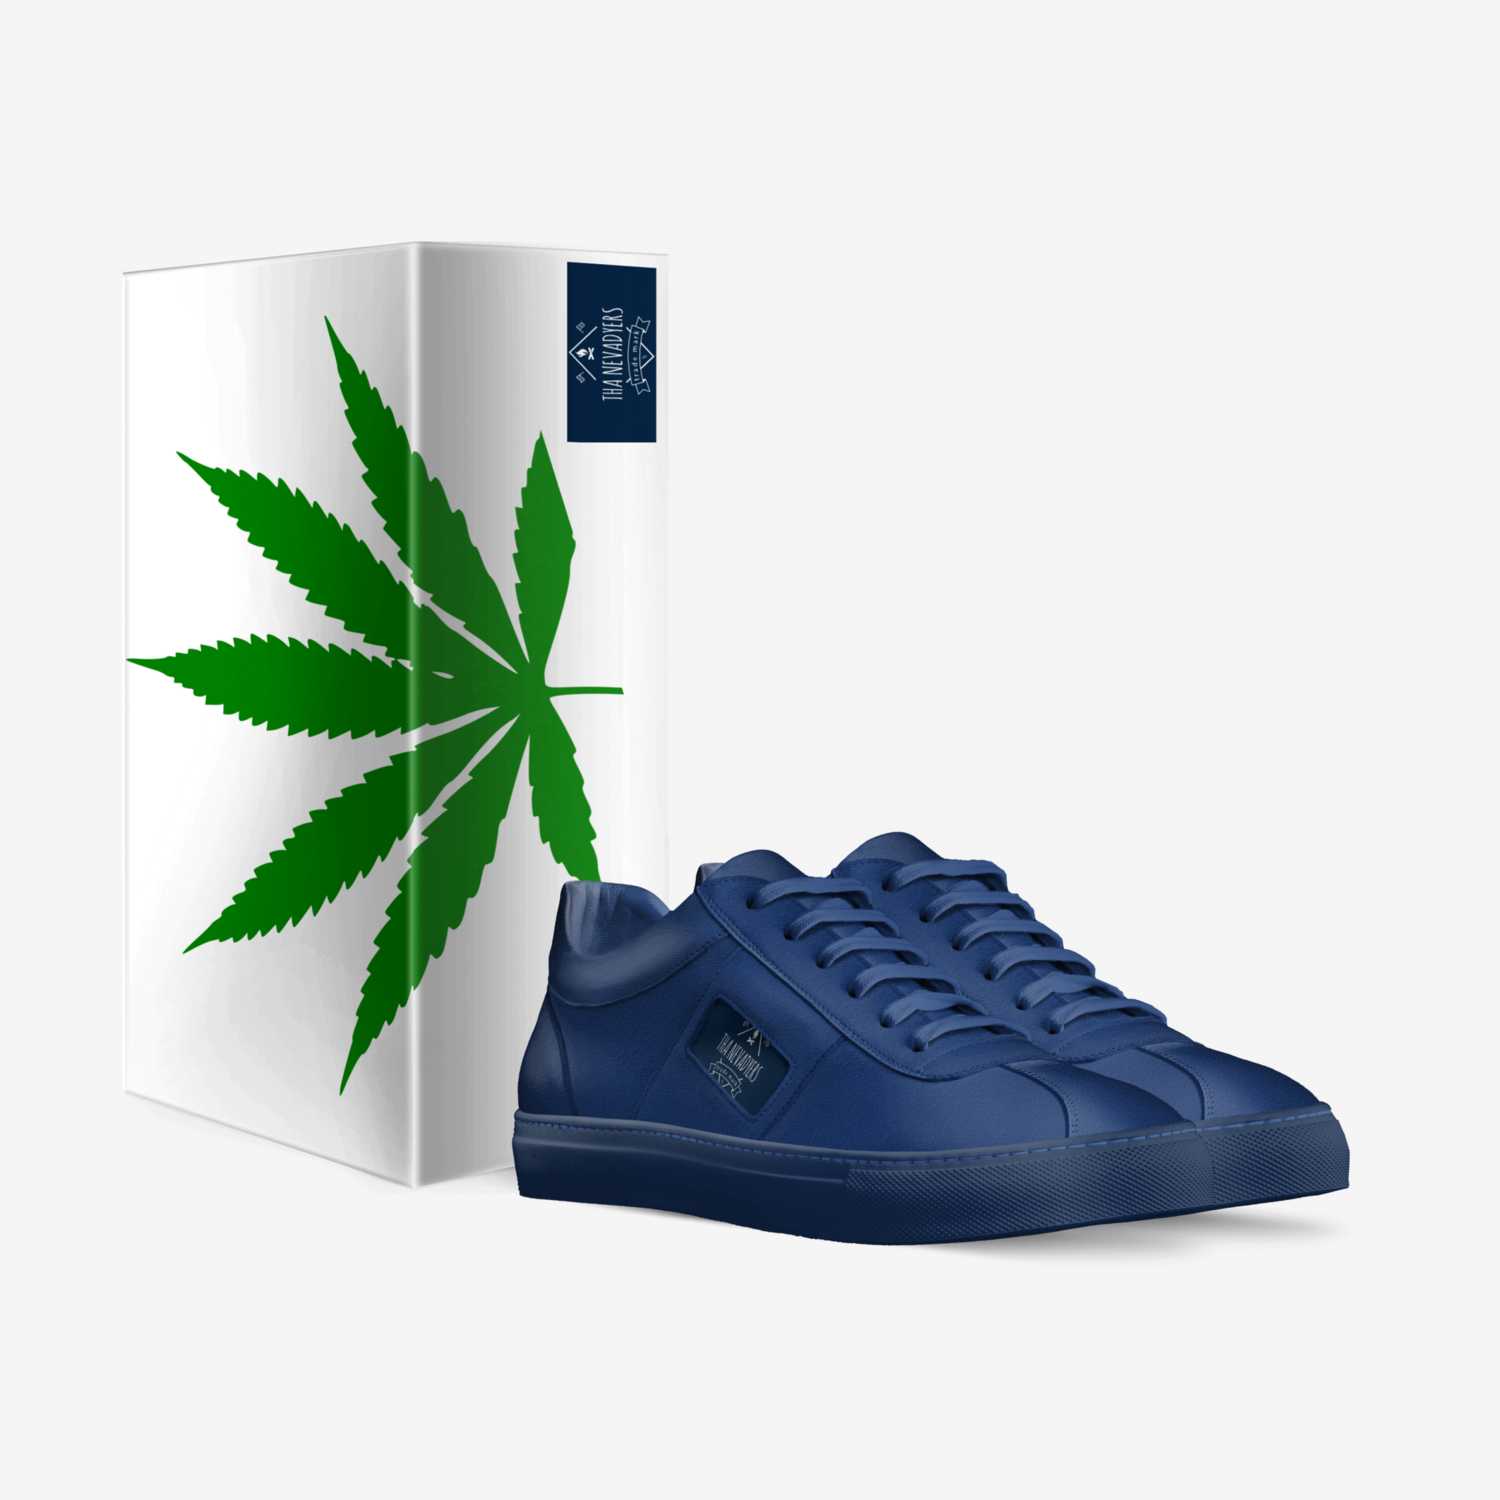 Blue Dream custom made in Italy shoes by Galatikz Dixon | Box view